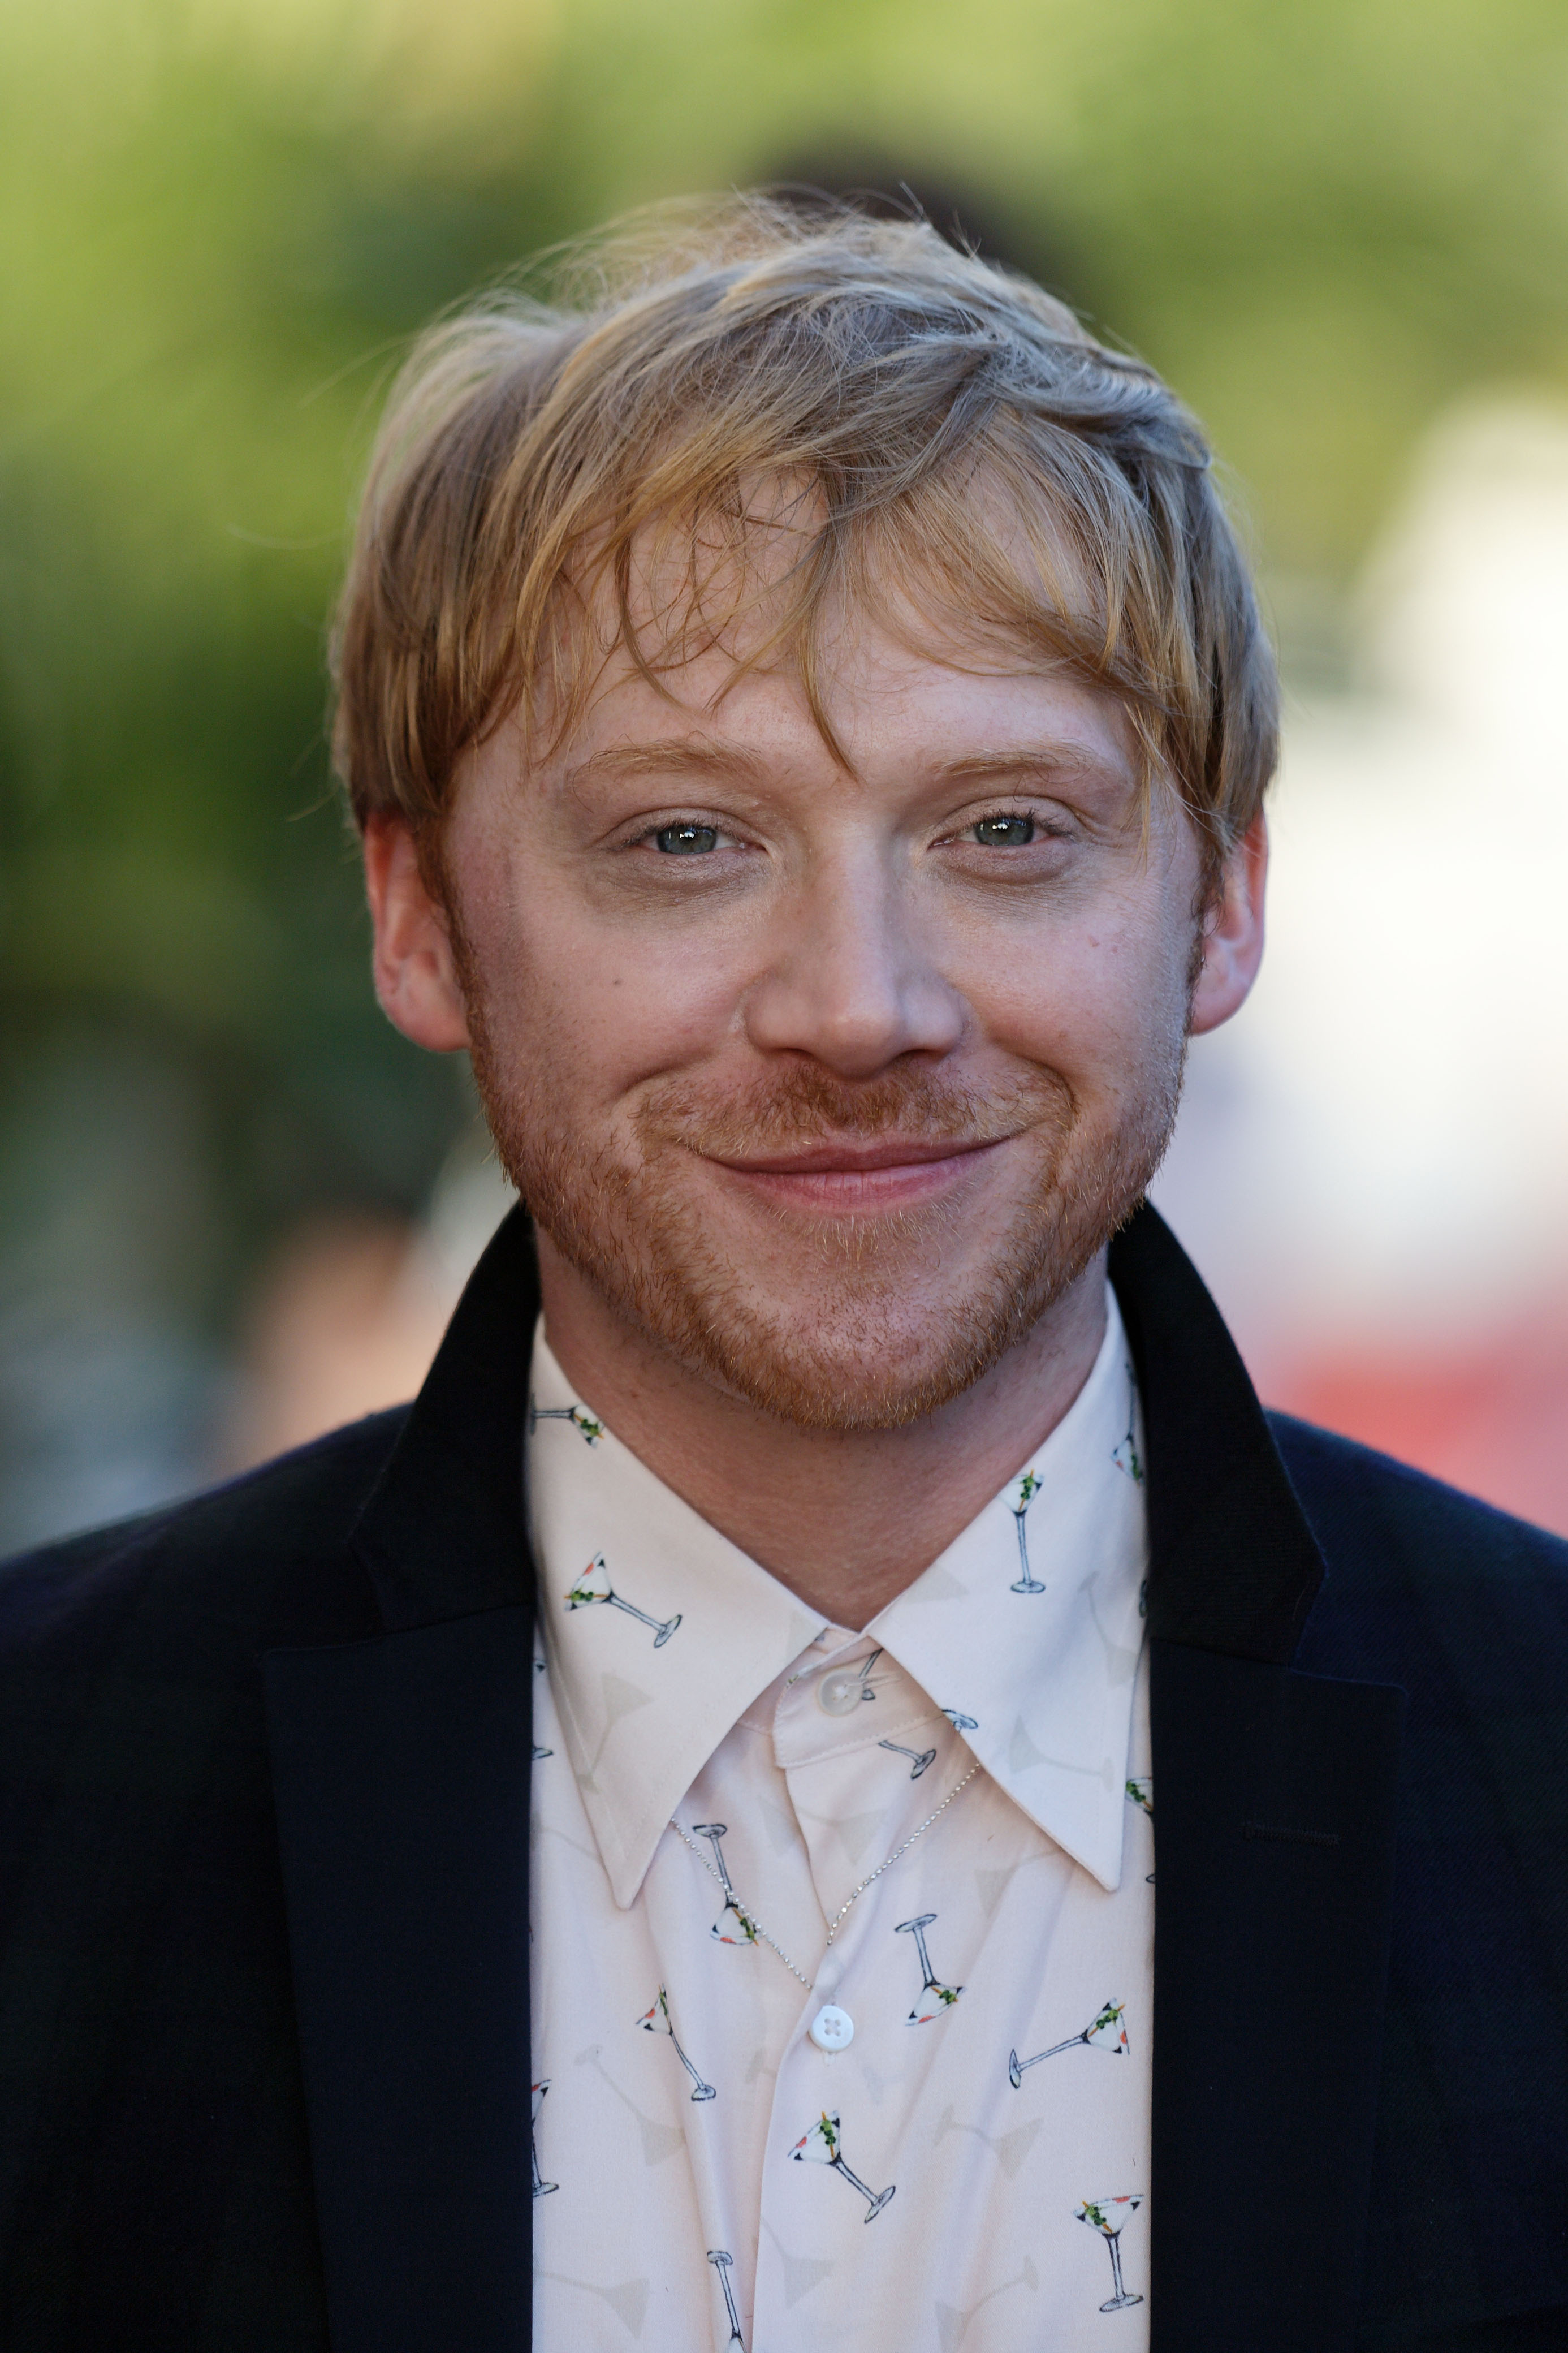 Rupert Grint at the 29th Dinard Film Festival in Dinard, France on September 27, 2018 | Source: Getty Images